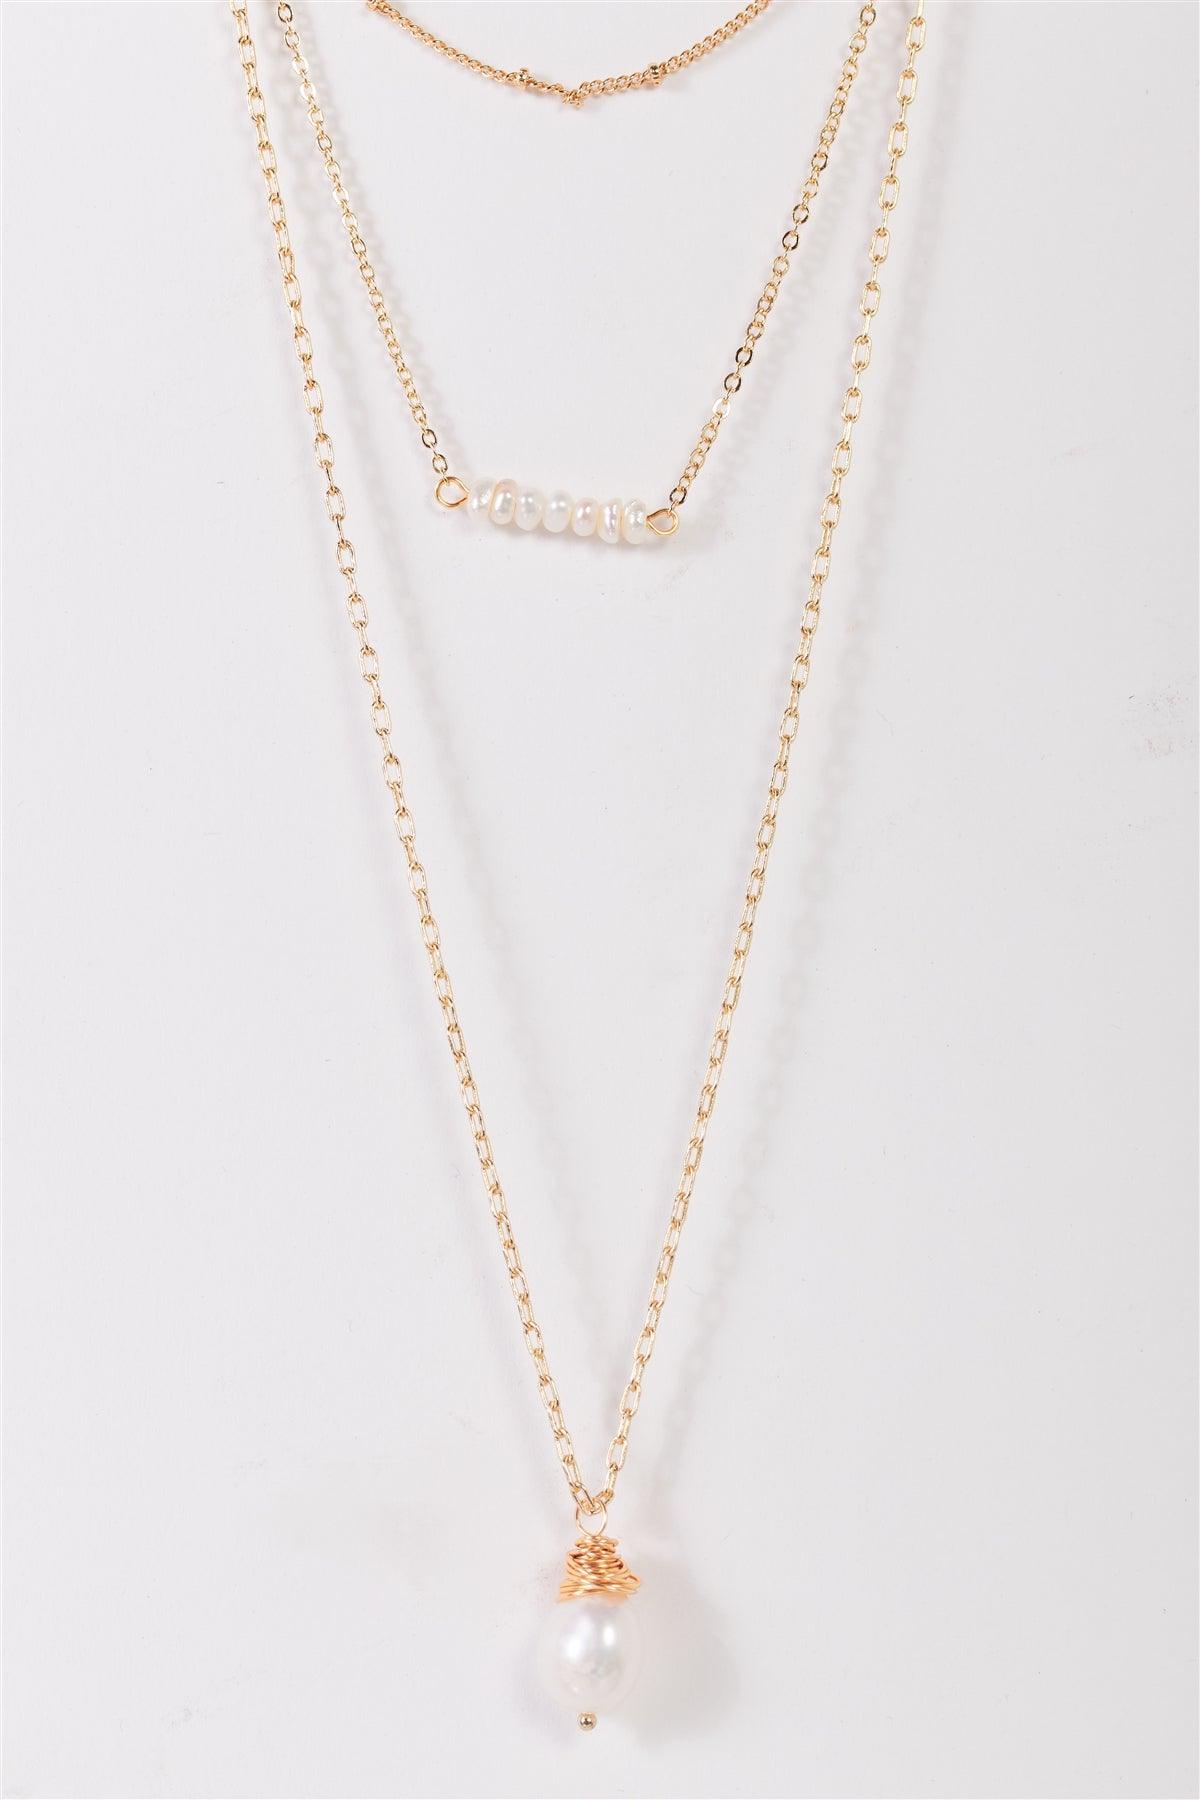 Gold Triple Layered Ball & Curb Paper Clip & Link Chains With Pearl Charms And Pendant Necklace /3 Pieces